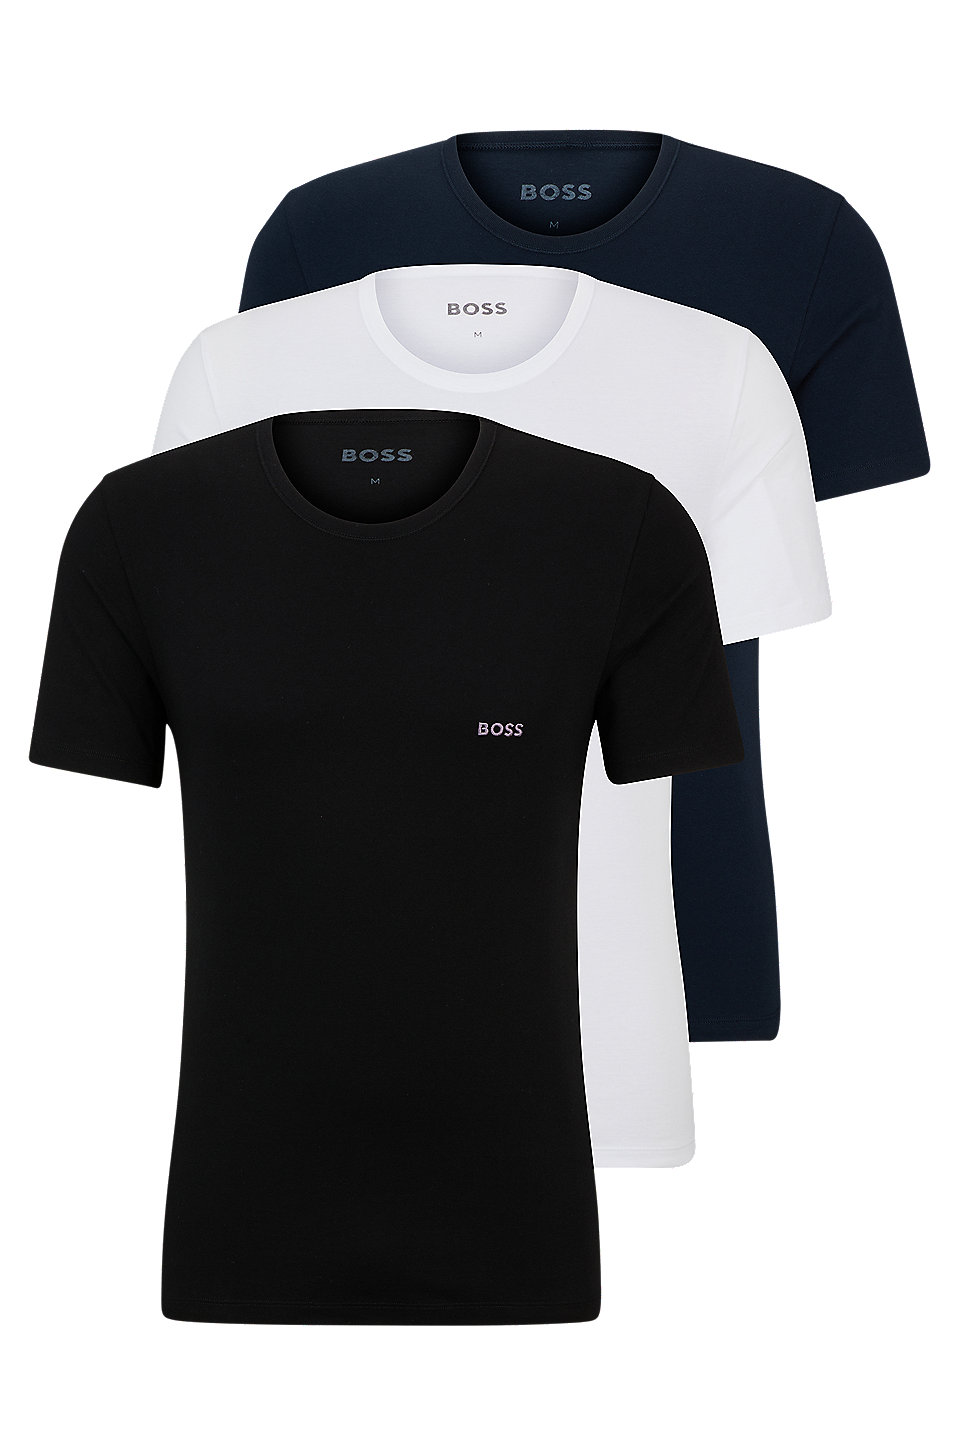 BOSS - Three-pack of branded underwear T-shirts in cotton jersey